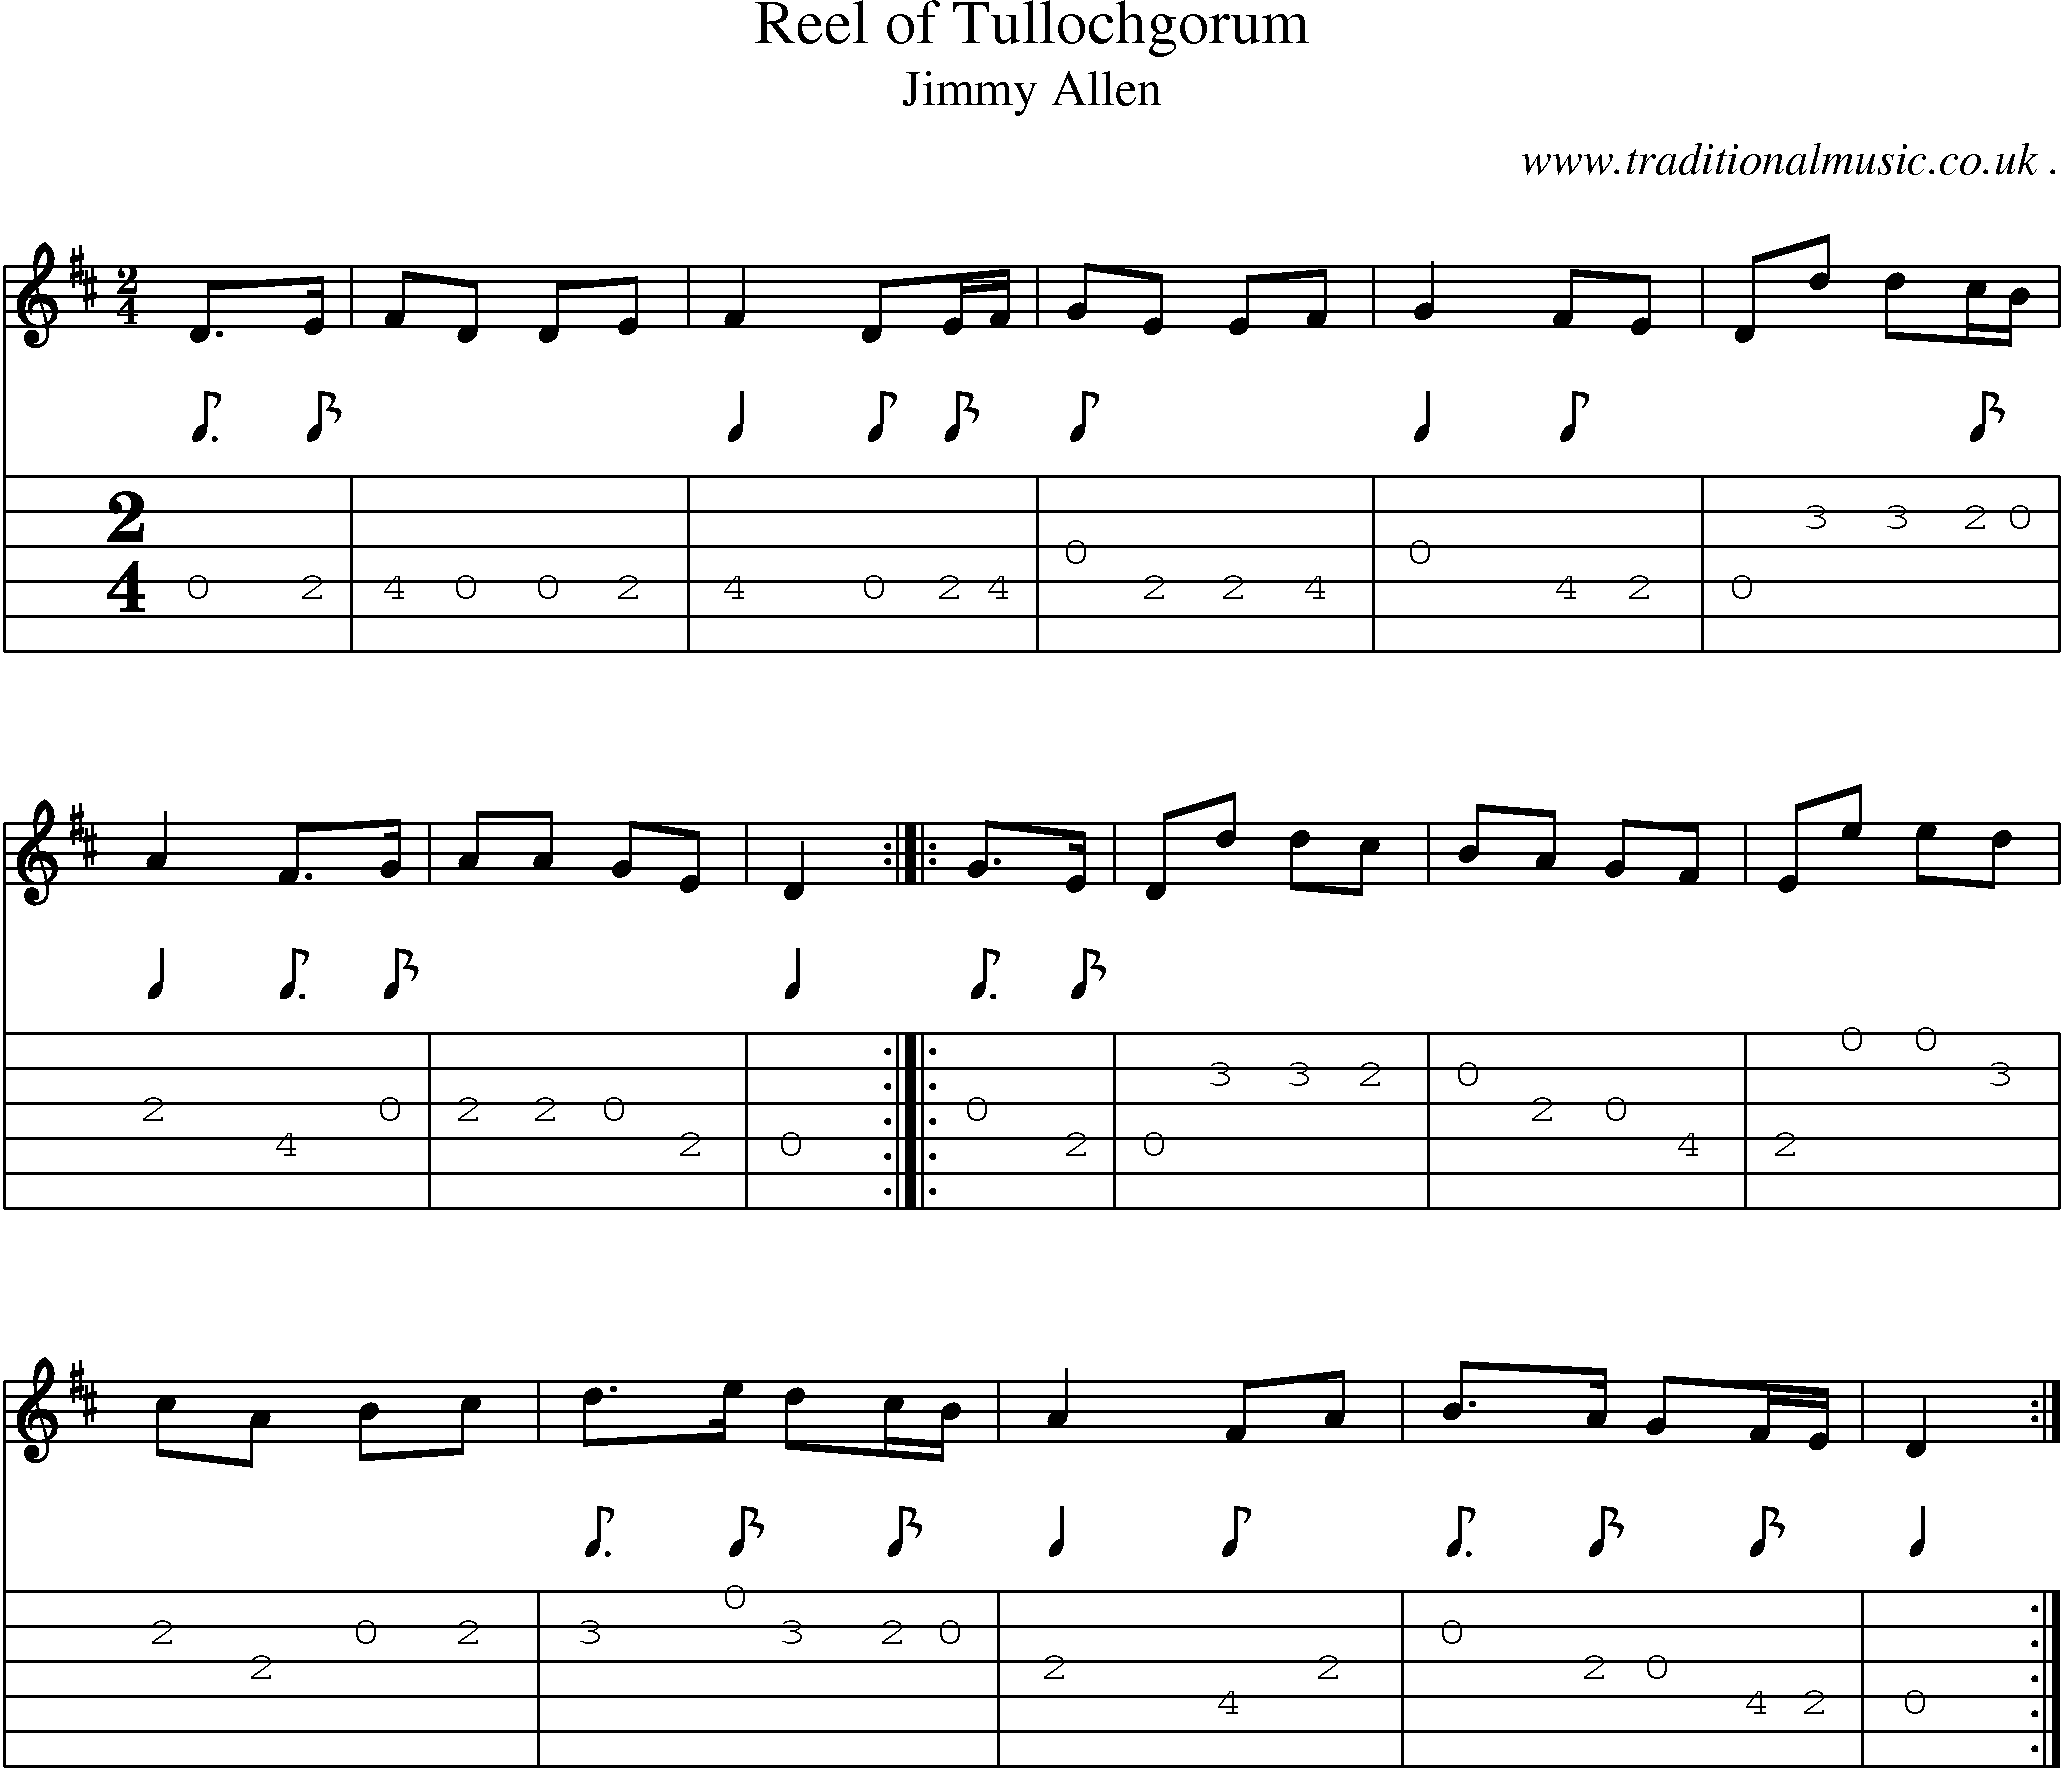 Sheet-music  score, Chords and Guitar Tabs for Reel Of Tullochgorum